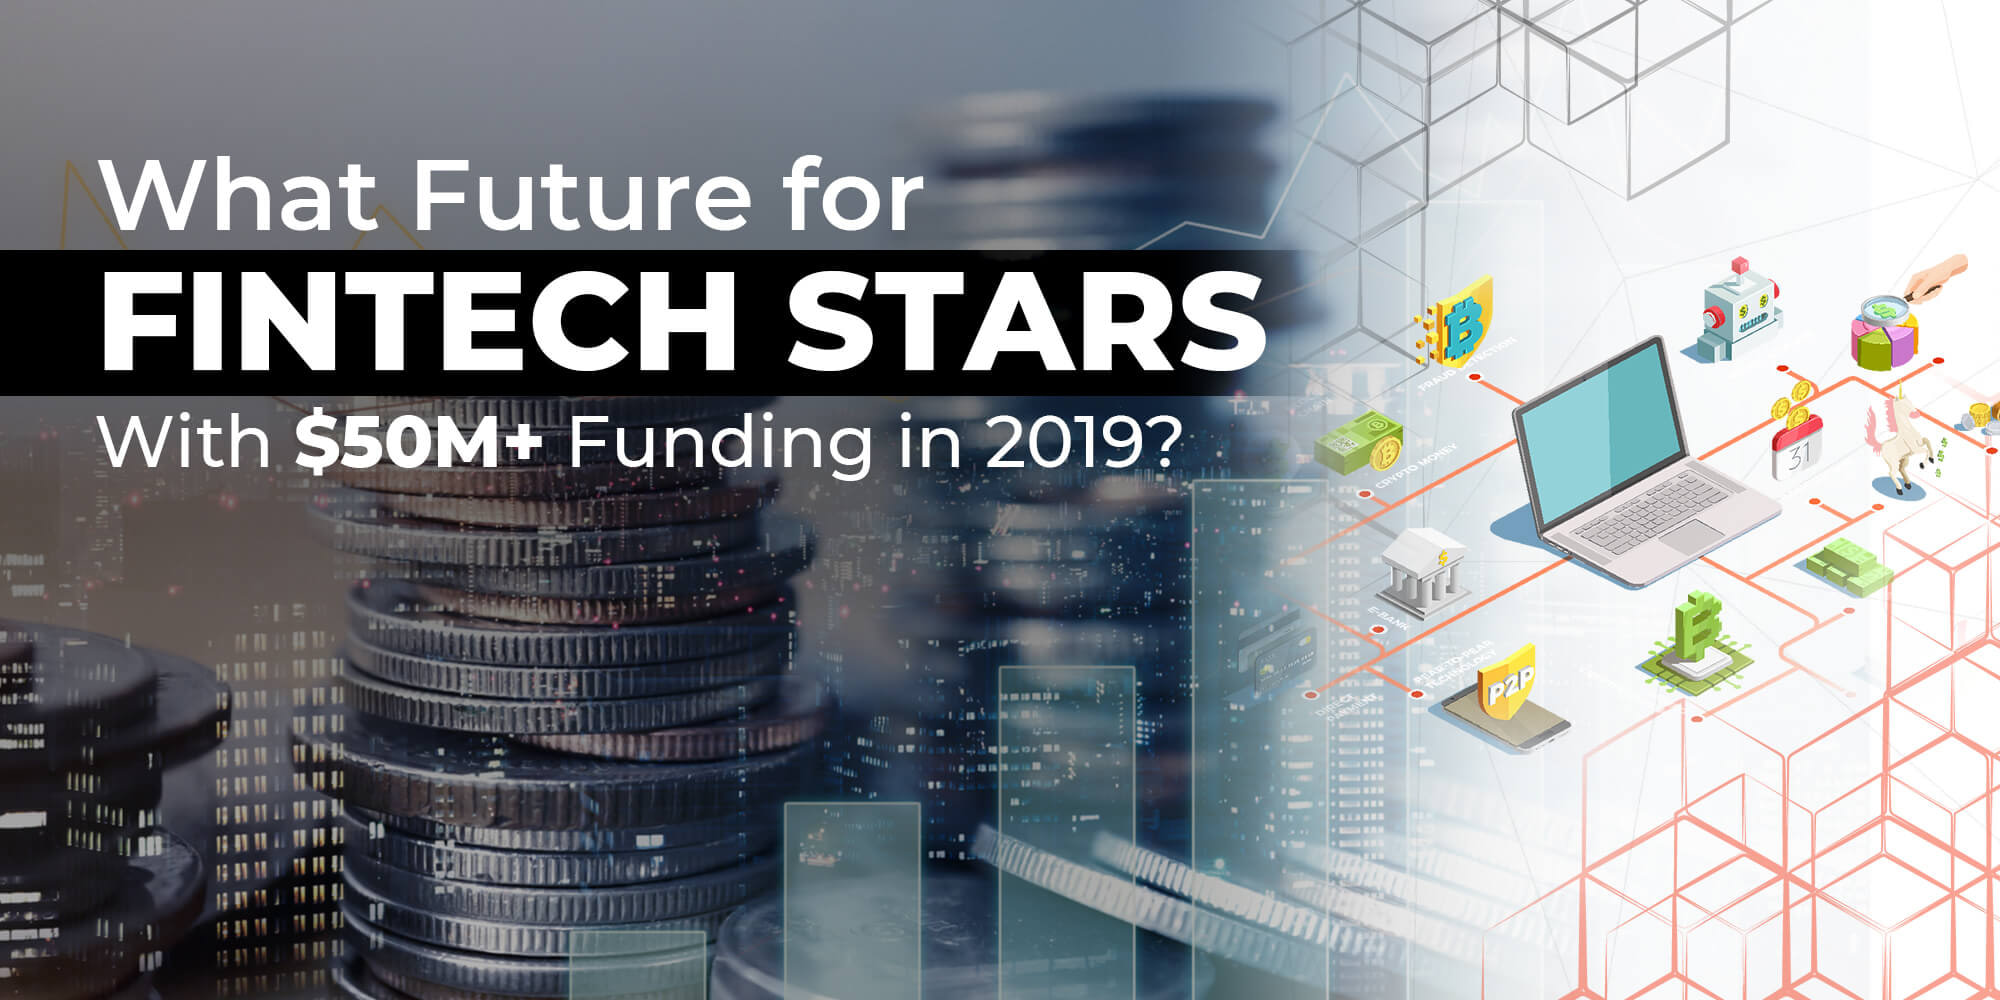 What Future for Fintech Stars with $50M+ Funding in 2019?